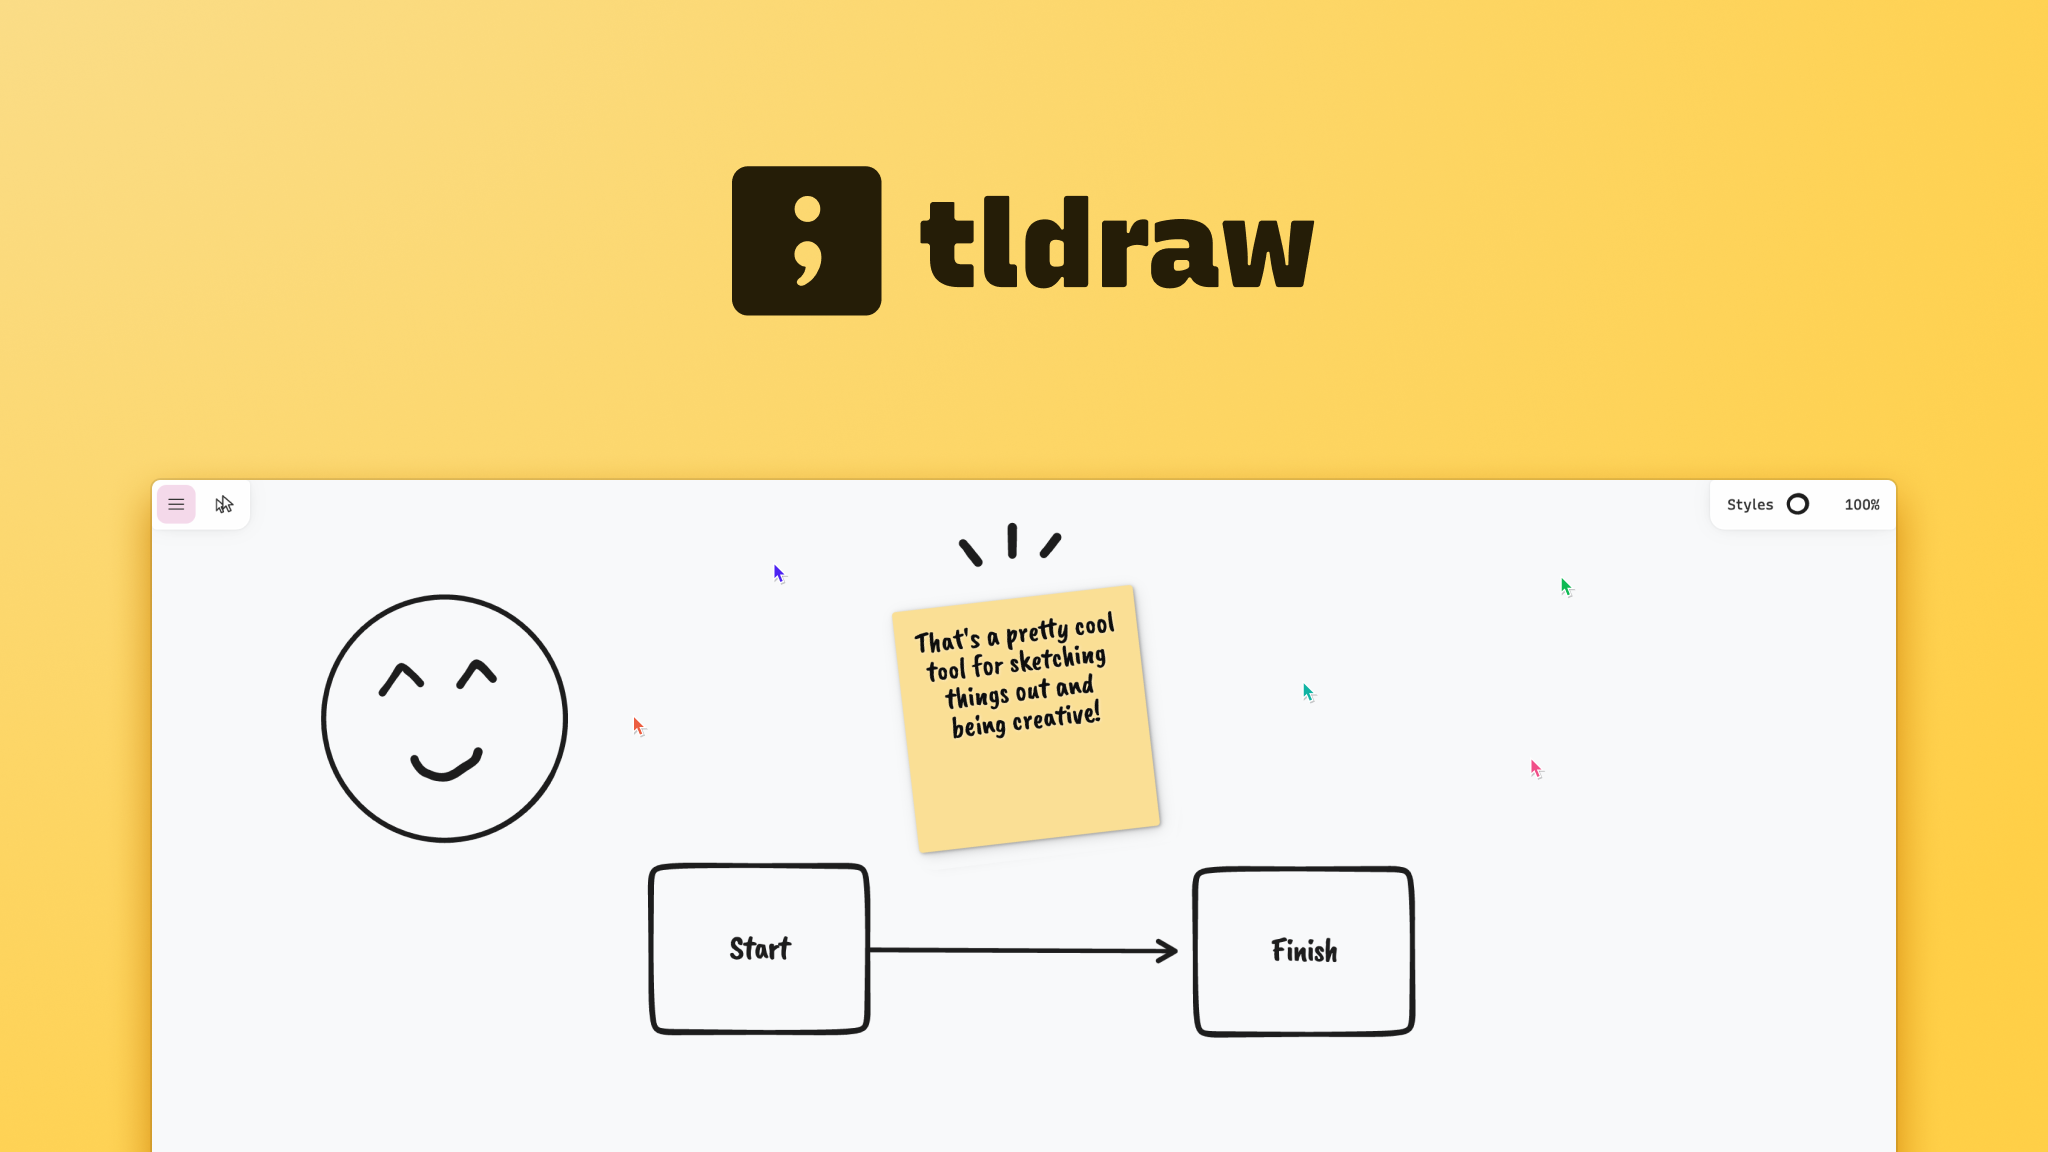 Tldraw became viral by converting its product to multiplayer with Liveblocks